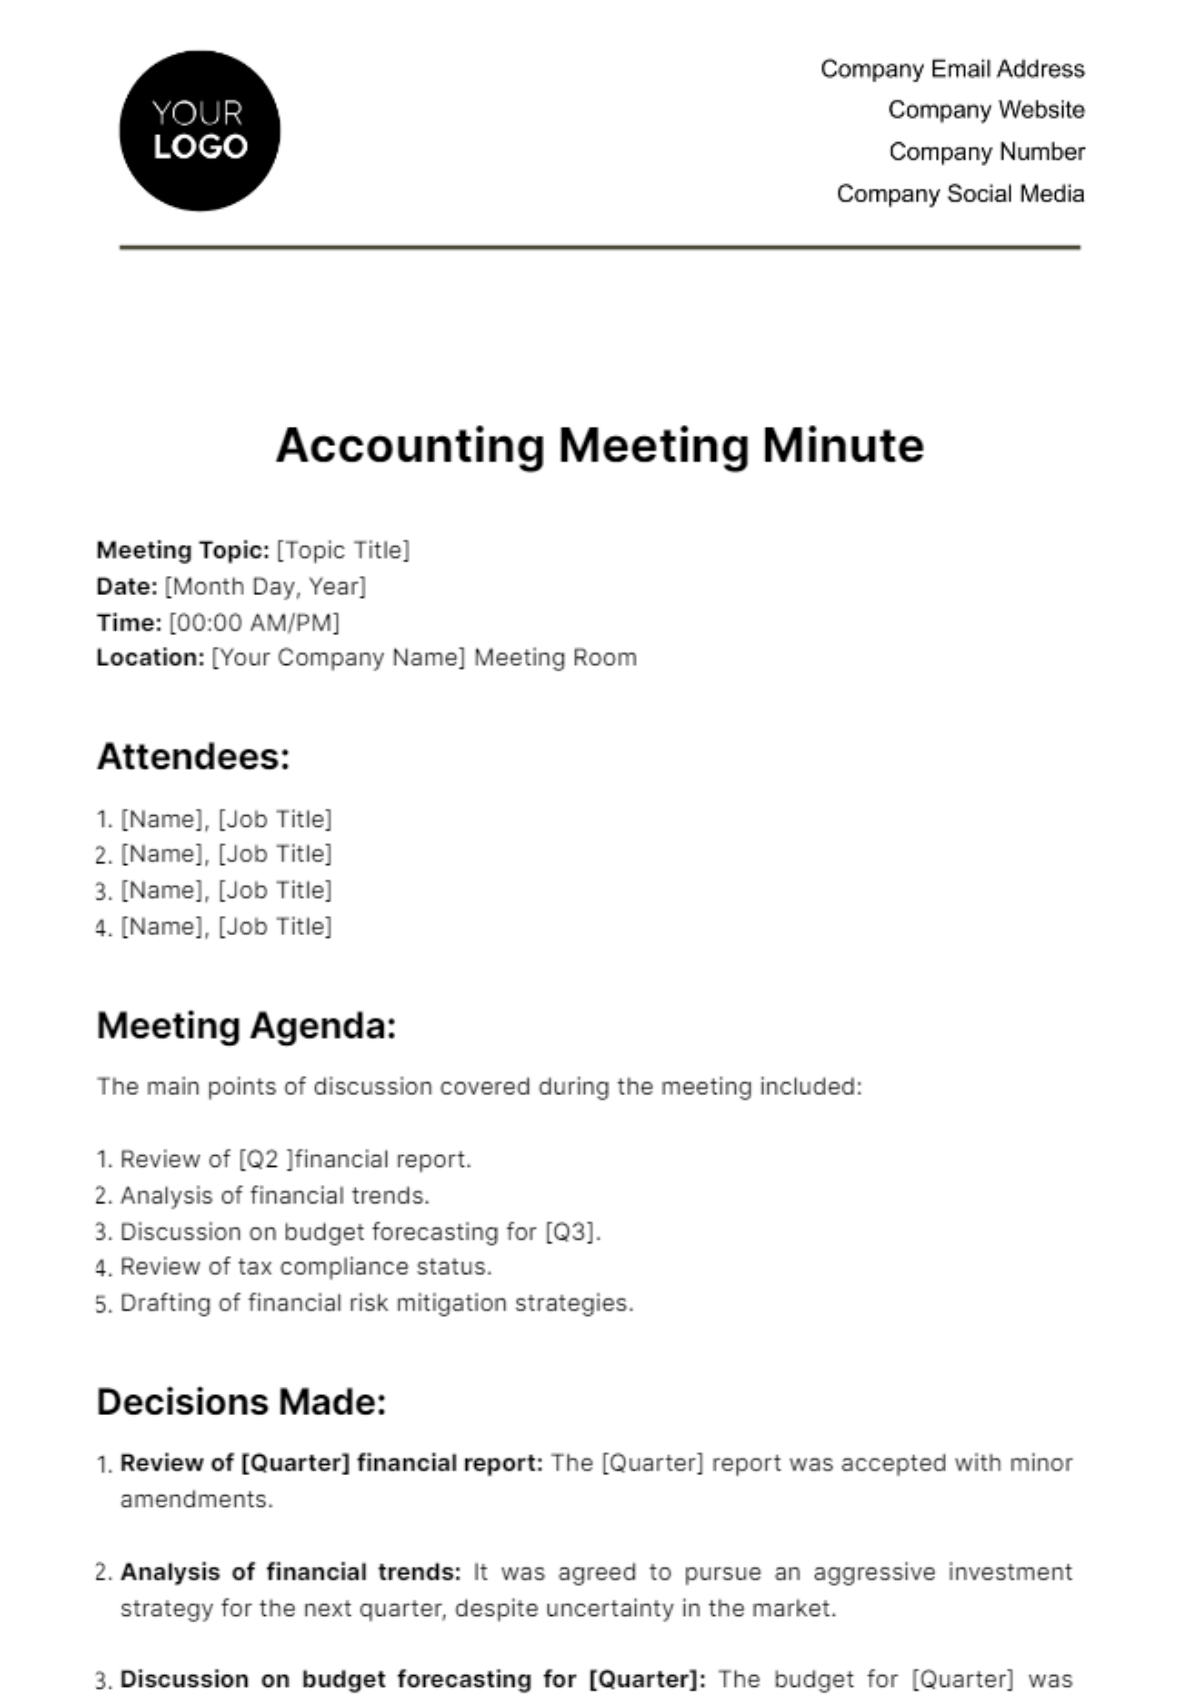 Accounting Meeting Minute Template